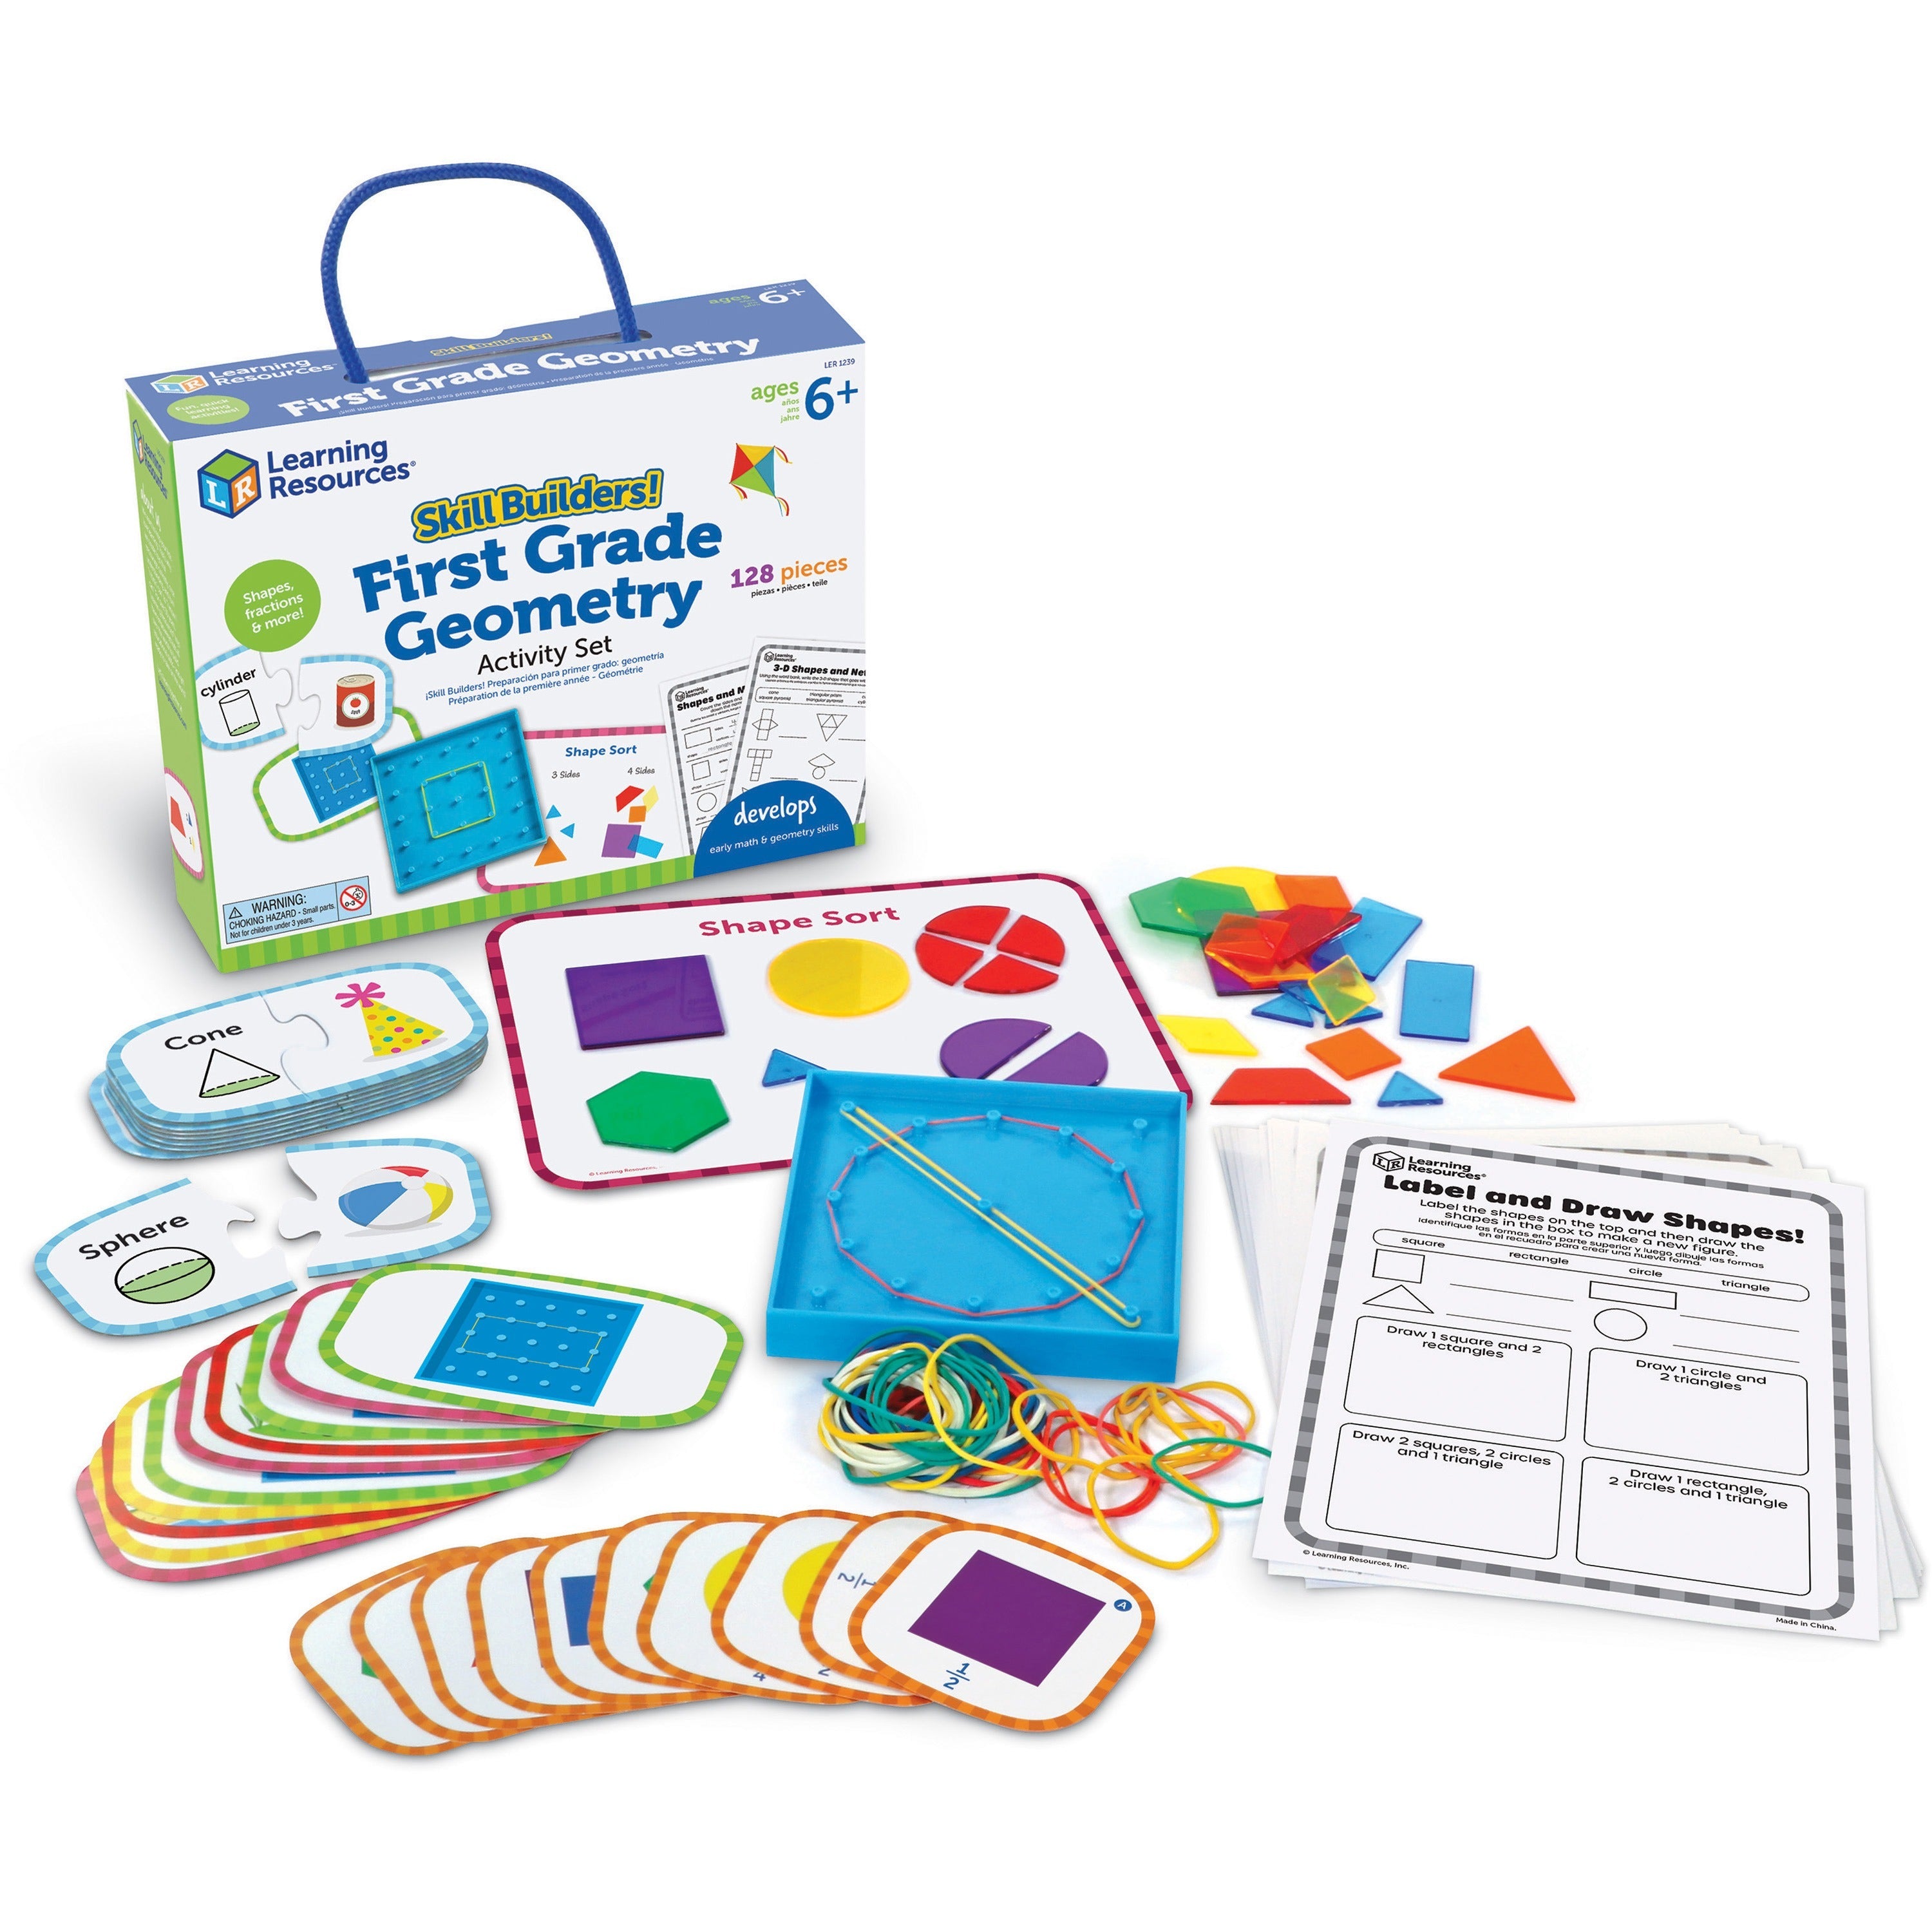 learning-resources-skill-builders!-first-grade-geometry-activity-set-theme-subject-fun-skill-learning-geometry-shape-fraction-128-pieces-6-10-year-1-each_lrnler1239 - 1